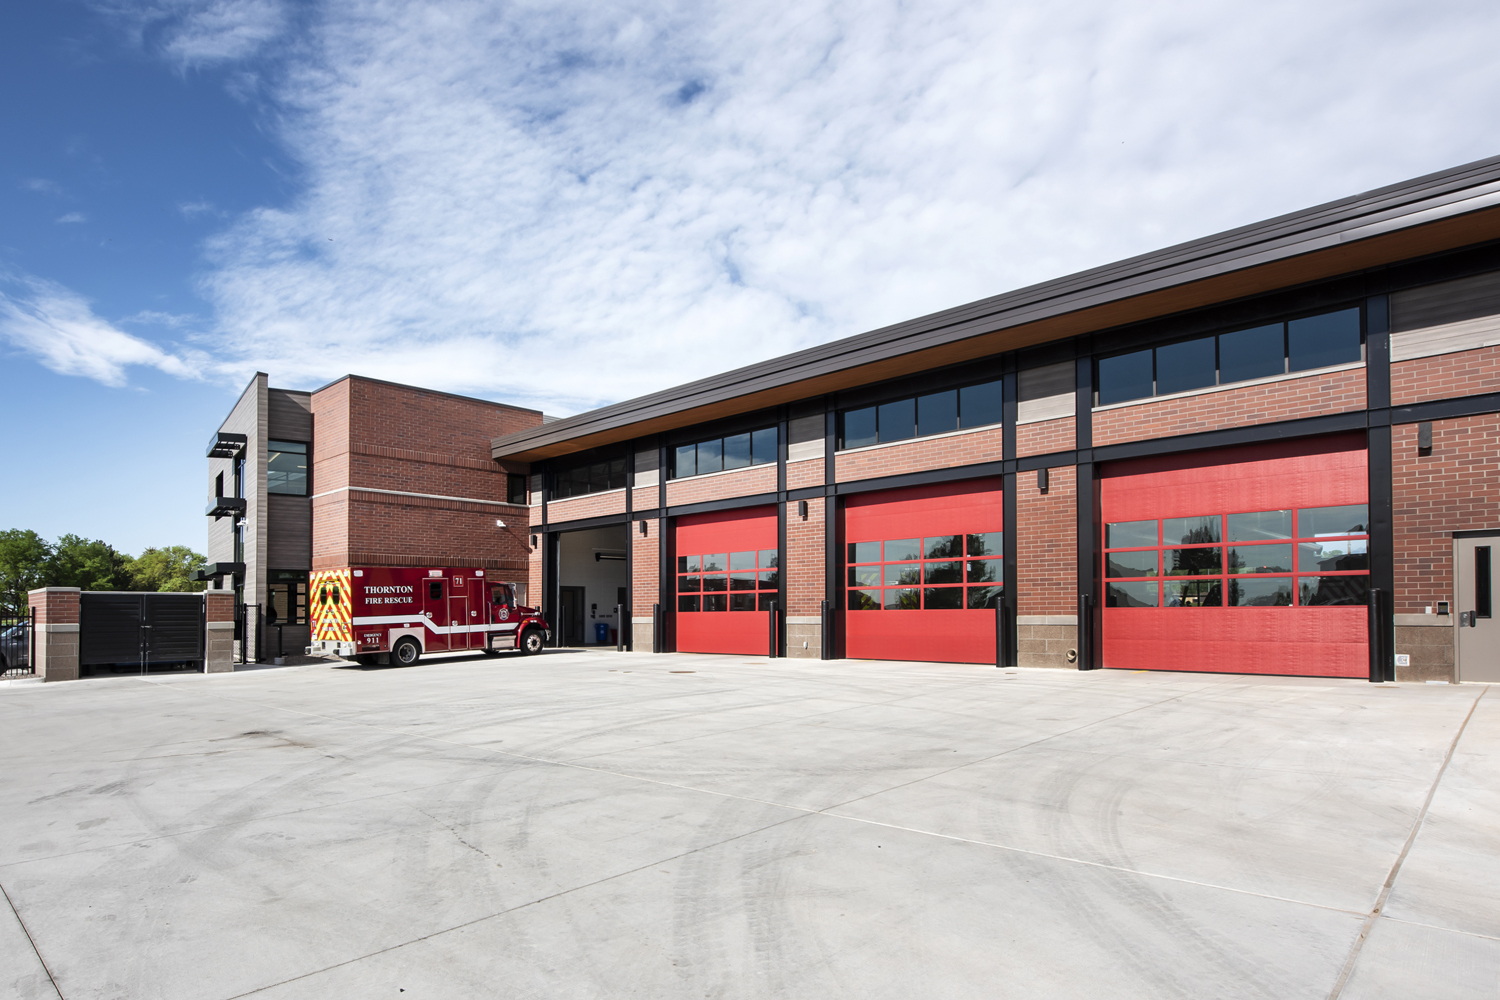 CITY OF THORNTON FIRE STATION #1